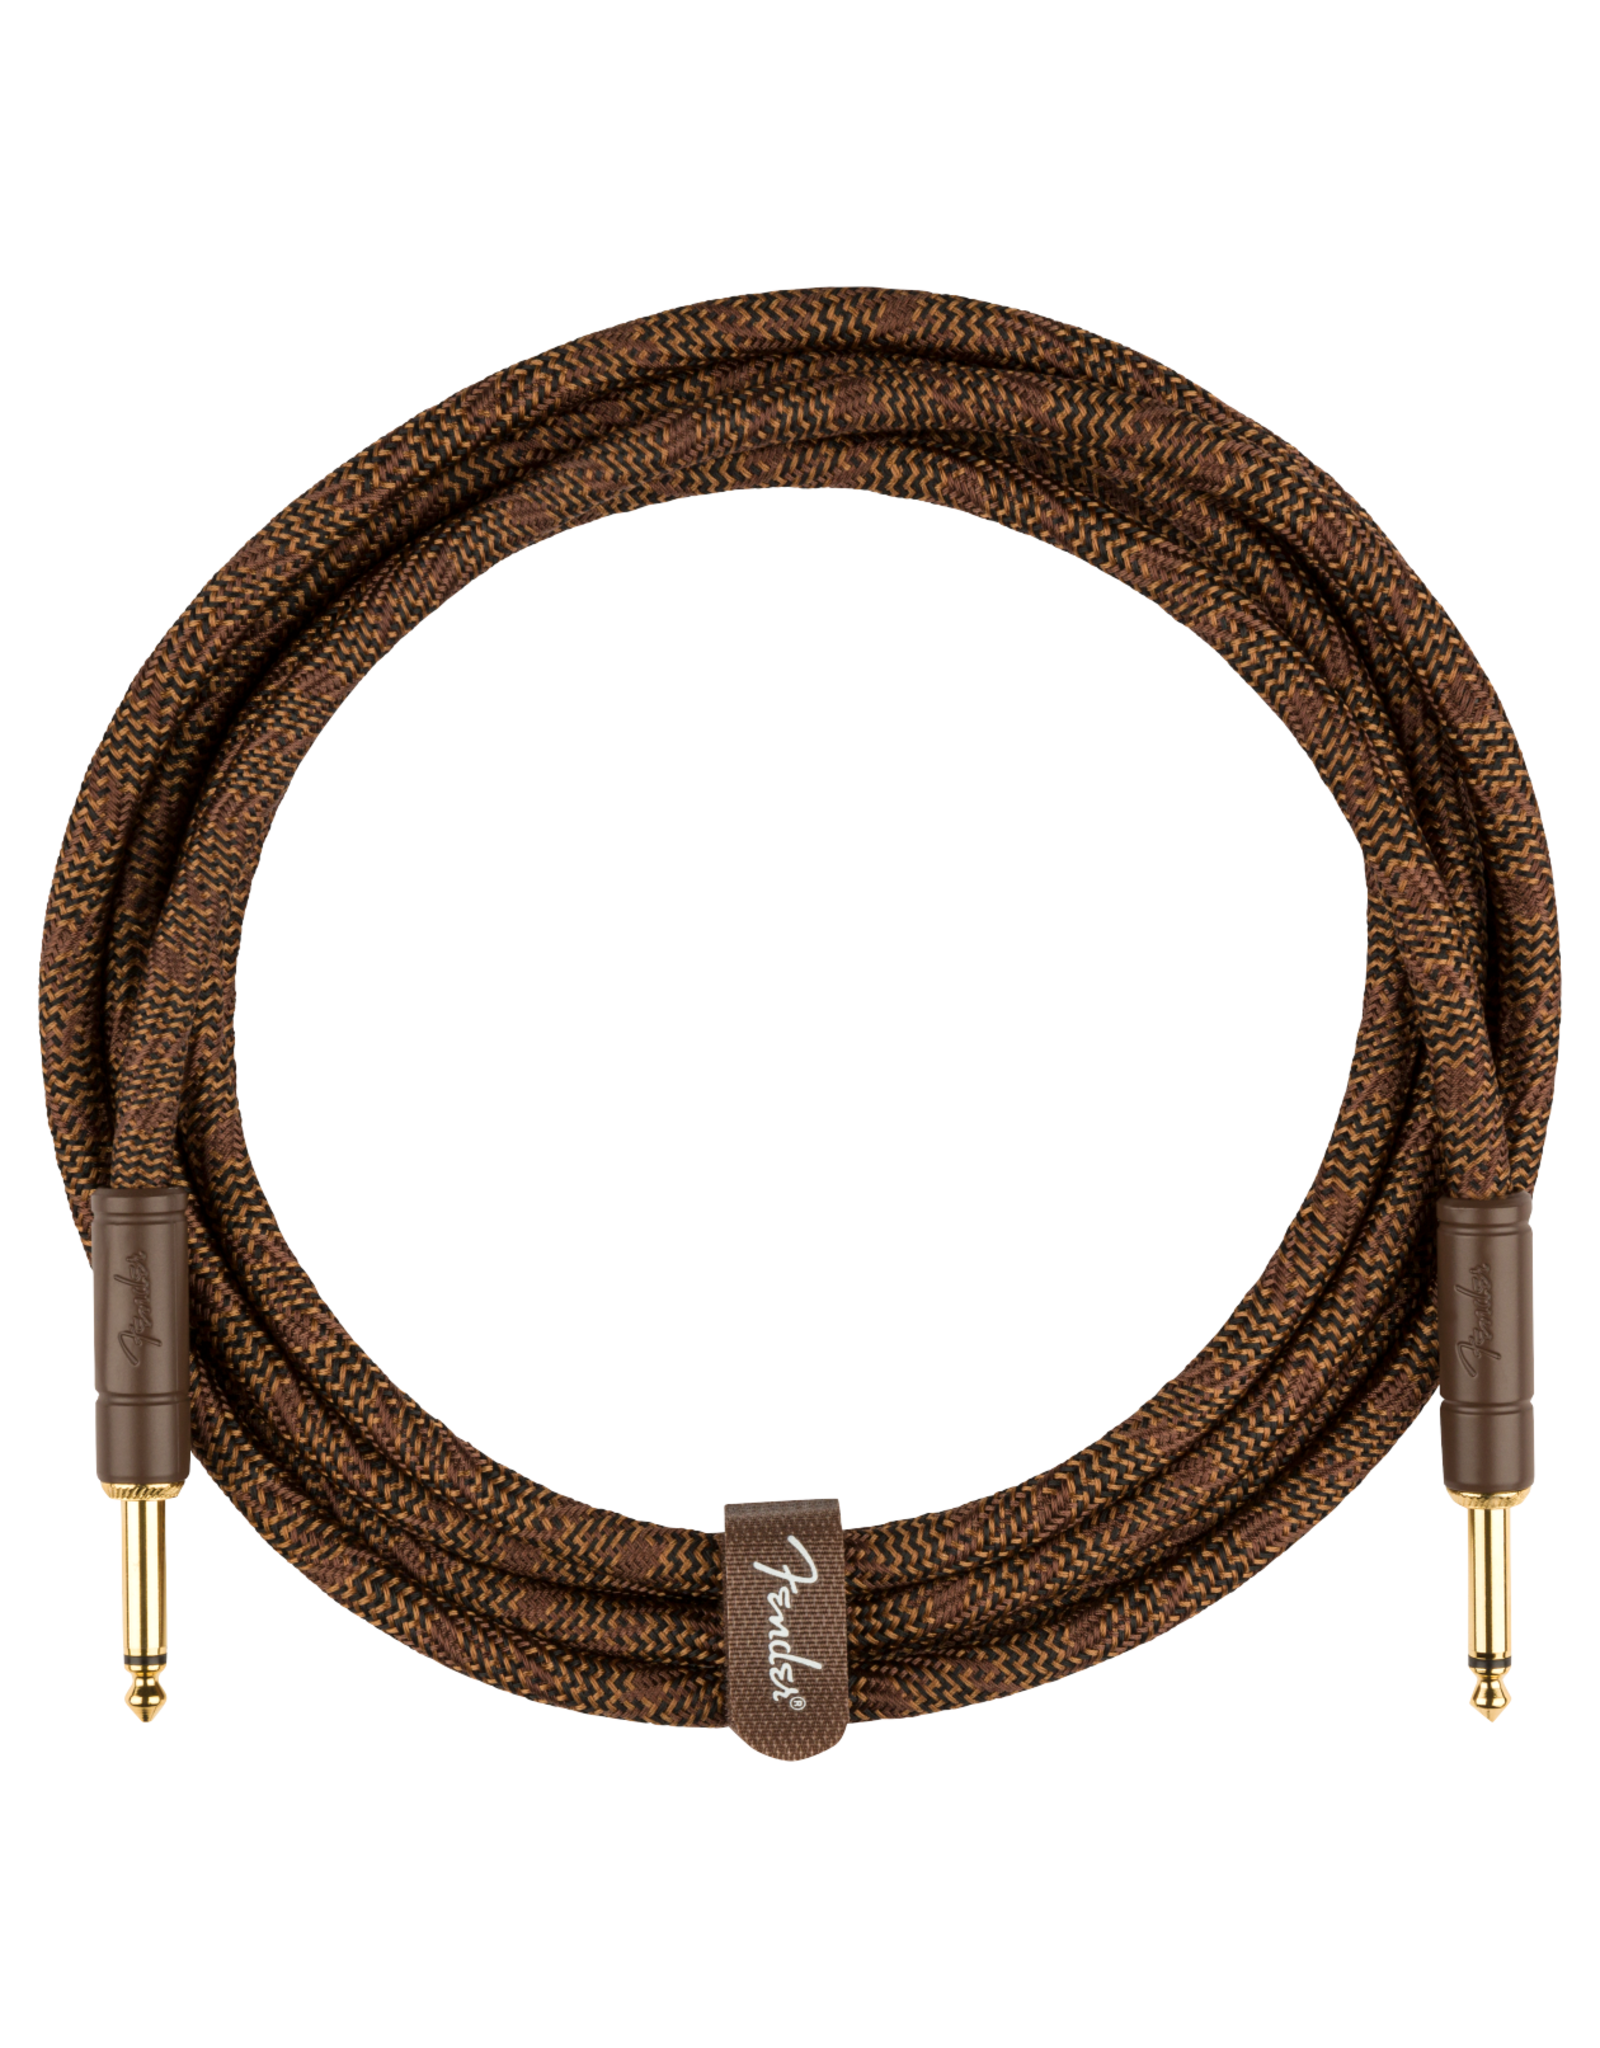 Fender Fender Paramount 10' Acoustic Instrument Cable, Brown